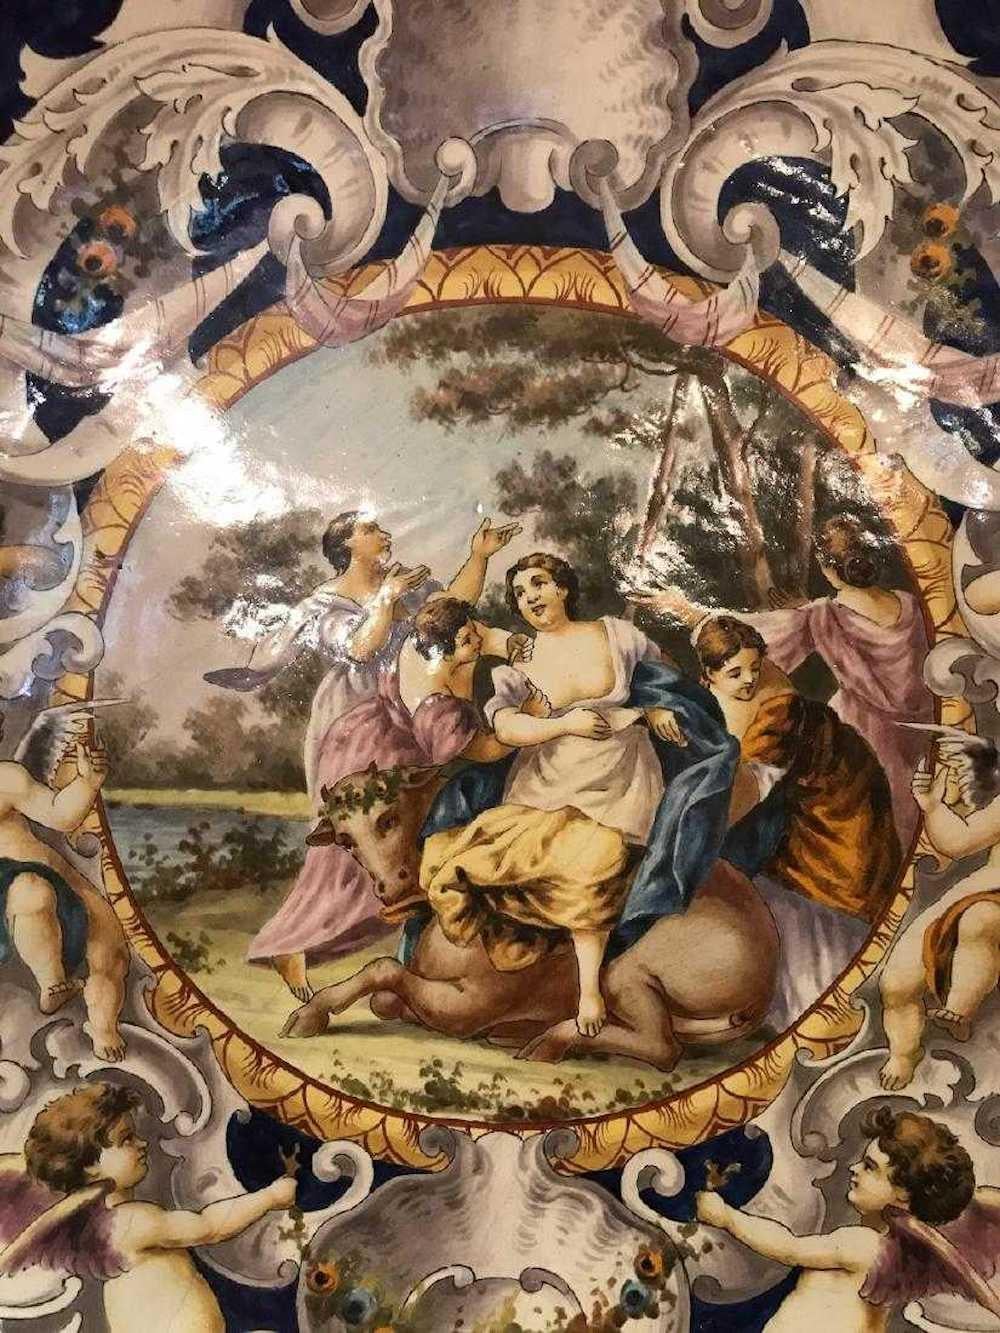 Crafted of earthenware pottery having a hand painted center landscape scene with guardians and bovine. The border depicts winged putti, floral garlands, stylized shells, and leaf scrolls. Colorfully decorated in tin glaze. Excellent condition. 25